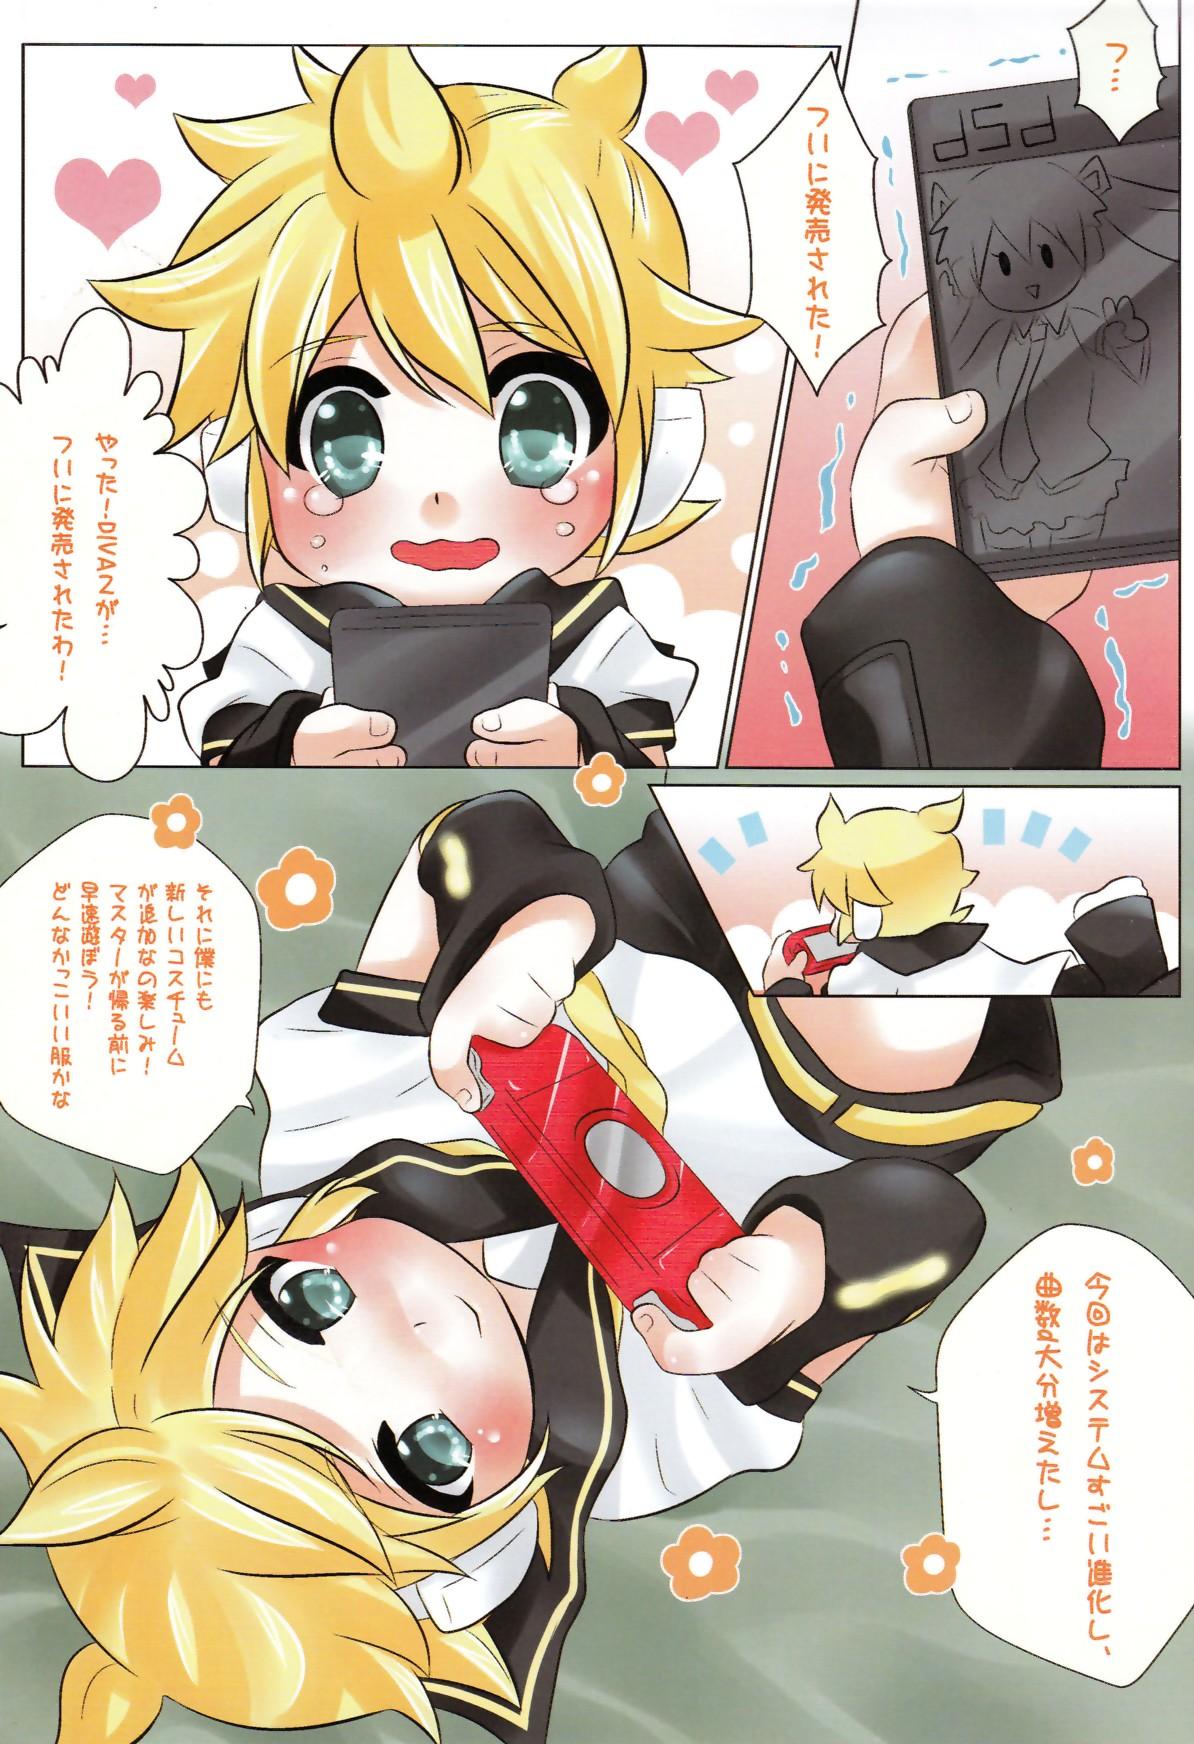 Shemale Project Len-kyun 2 - Vocaloid Bribe - Page 3